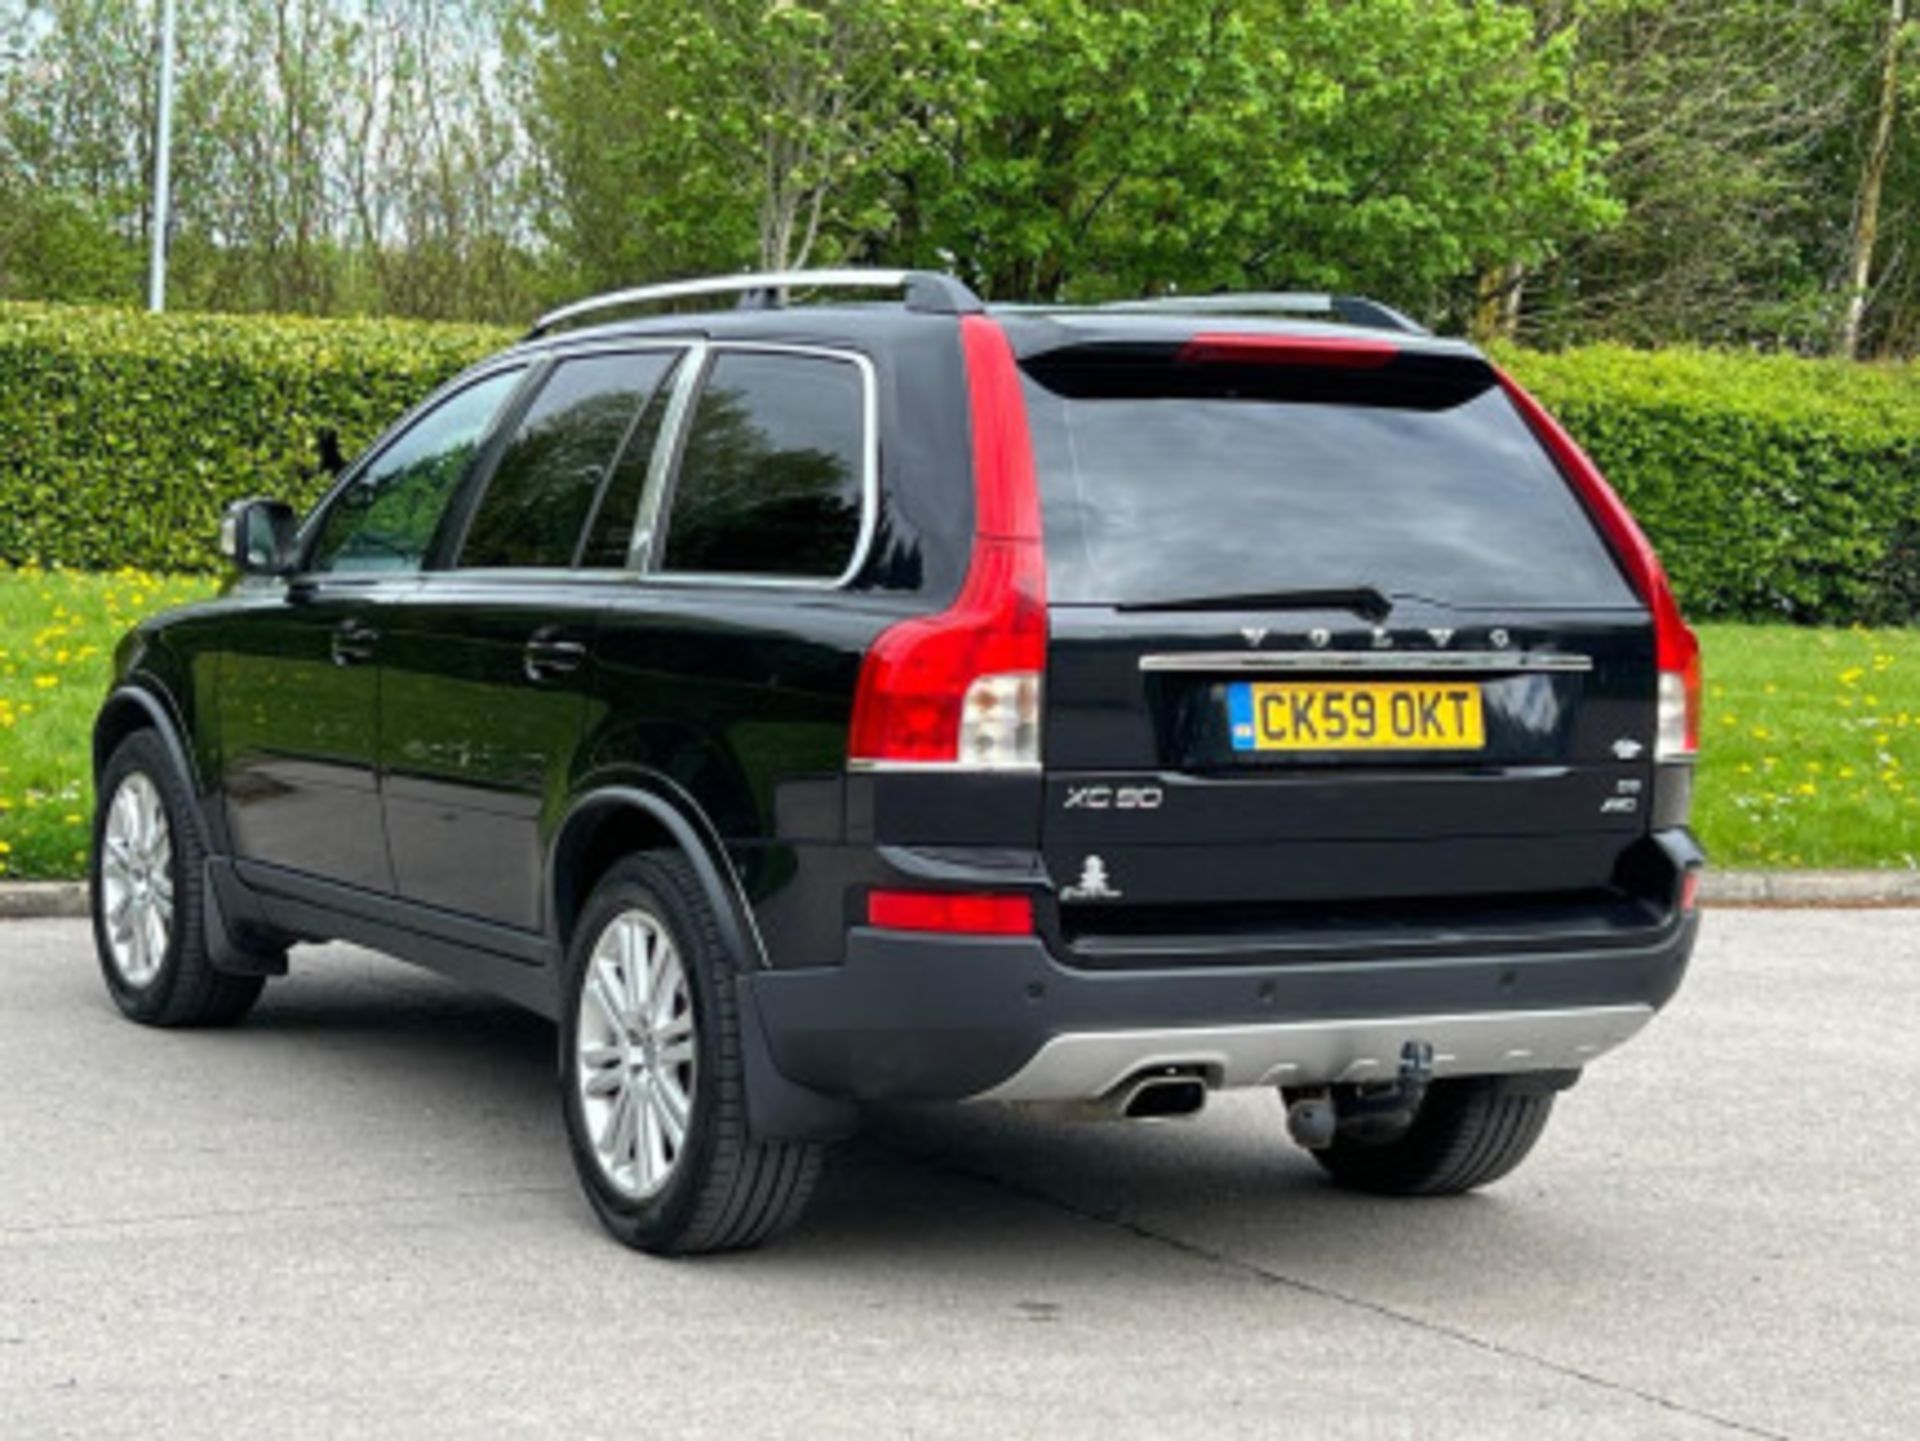 VOLVO XC90 2.4 D5 EXECUTIVE GEARTRONIC AWD, 5DR >>--NO VAT ON HAMMER--<< - Image 63 of 136